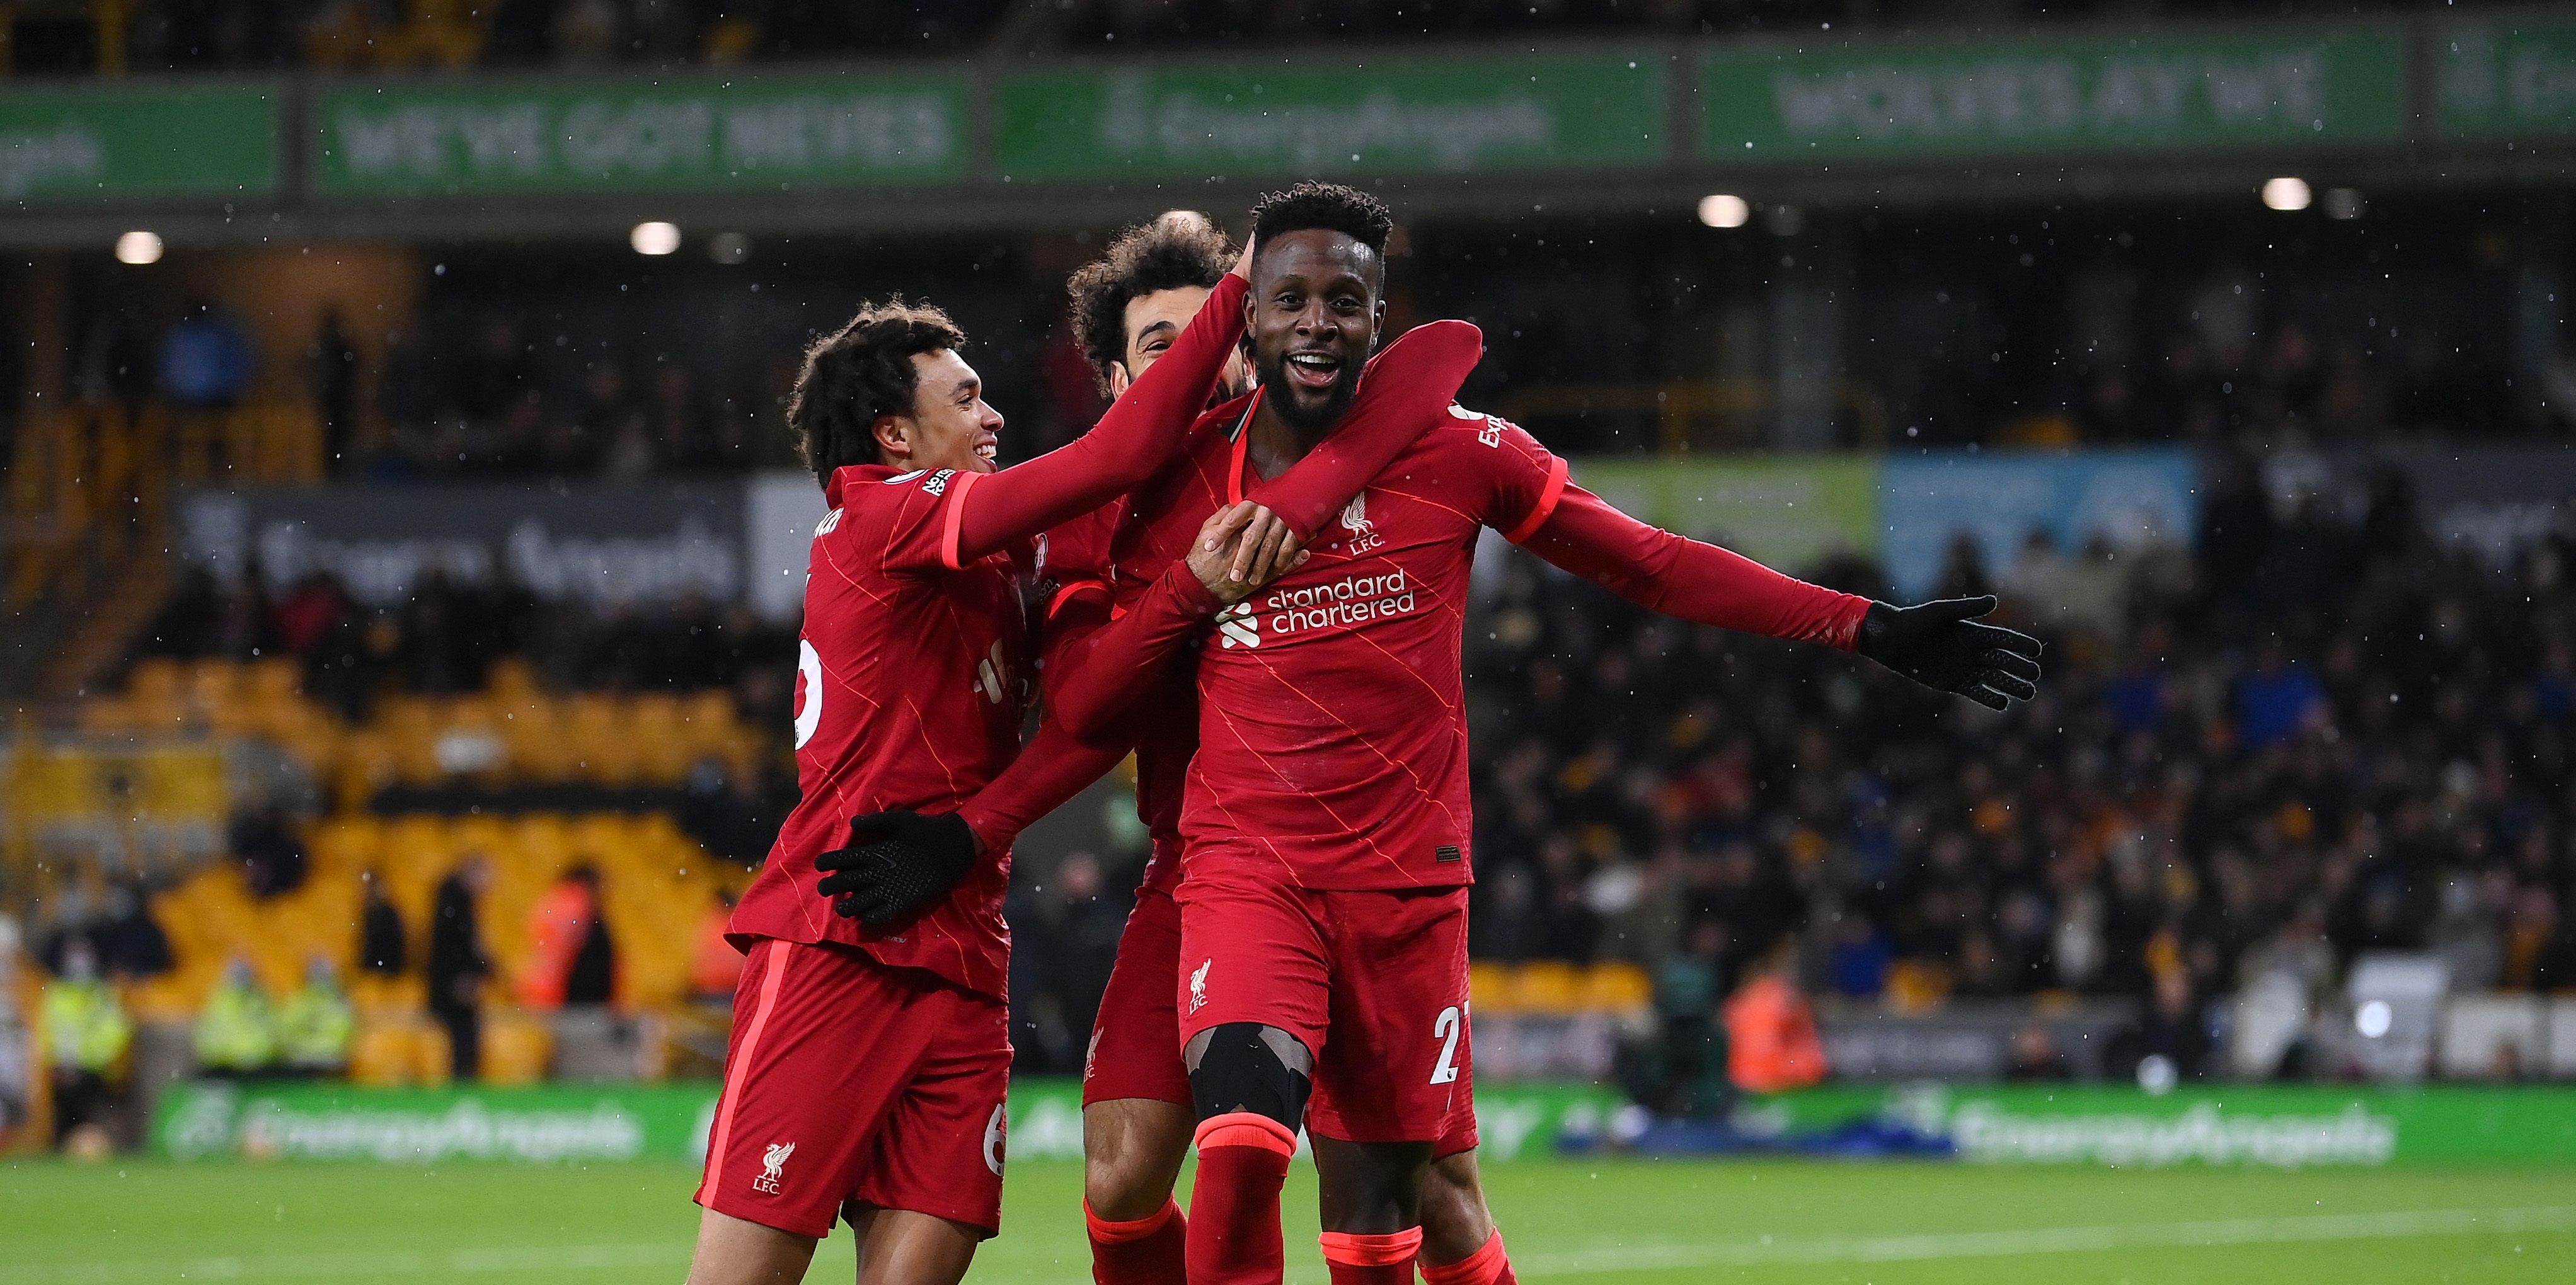 Romano provides Divock Origi contract update as Serie A outfit ‘pushing to complete agreement’ with the Belgian